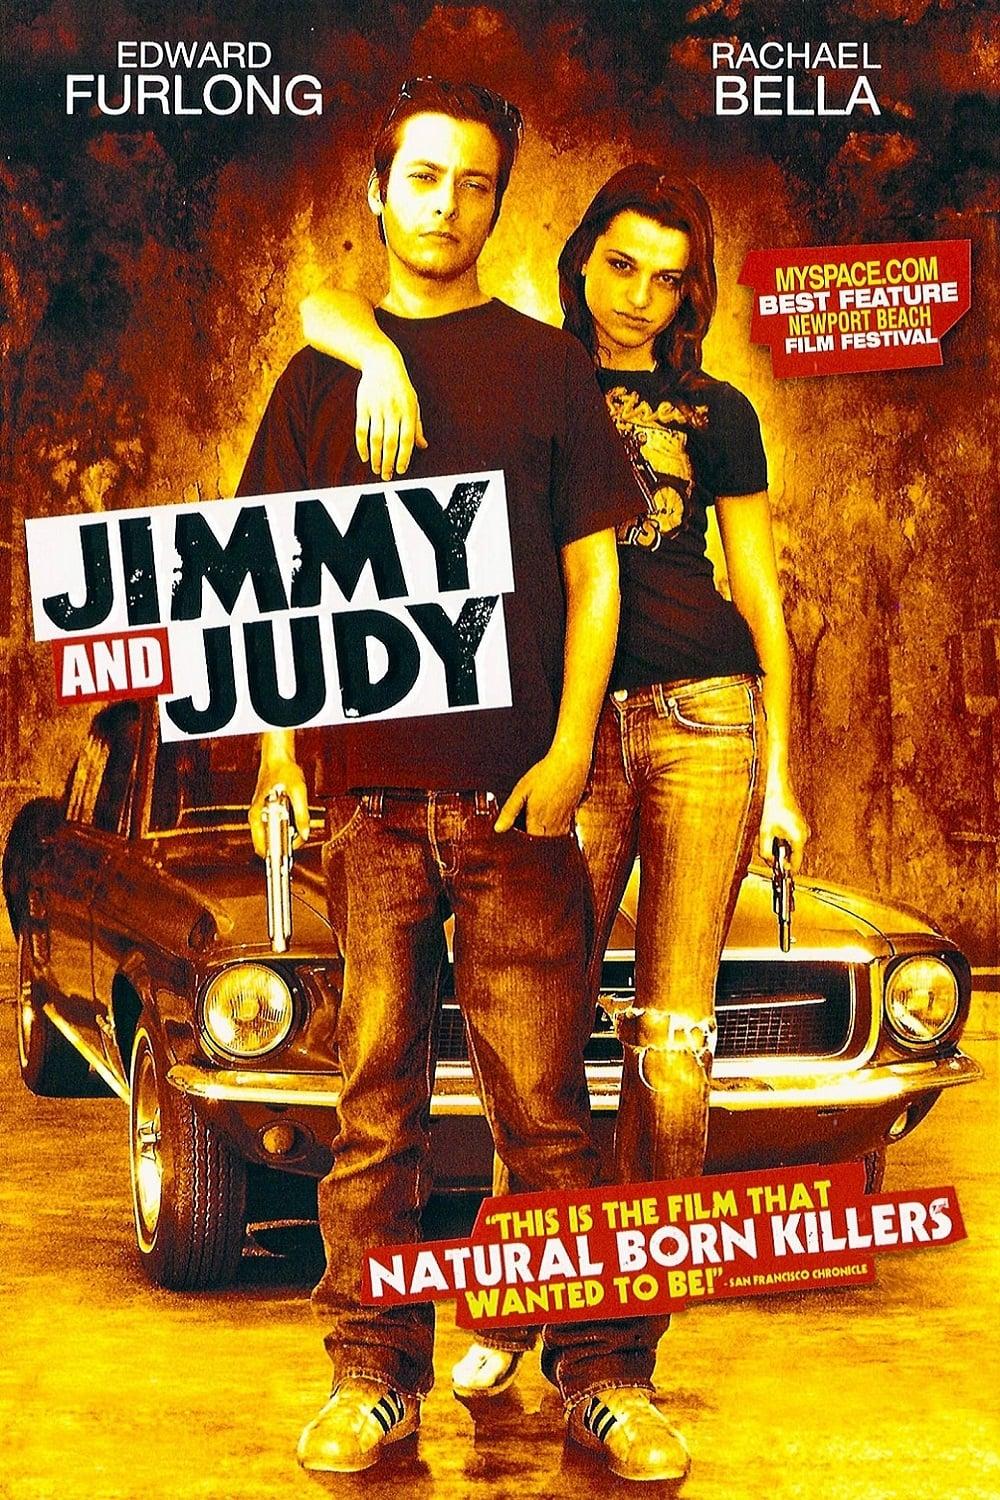 Jimmy and Judy poster